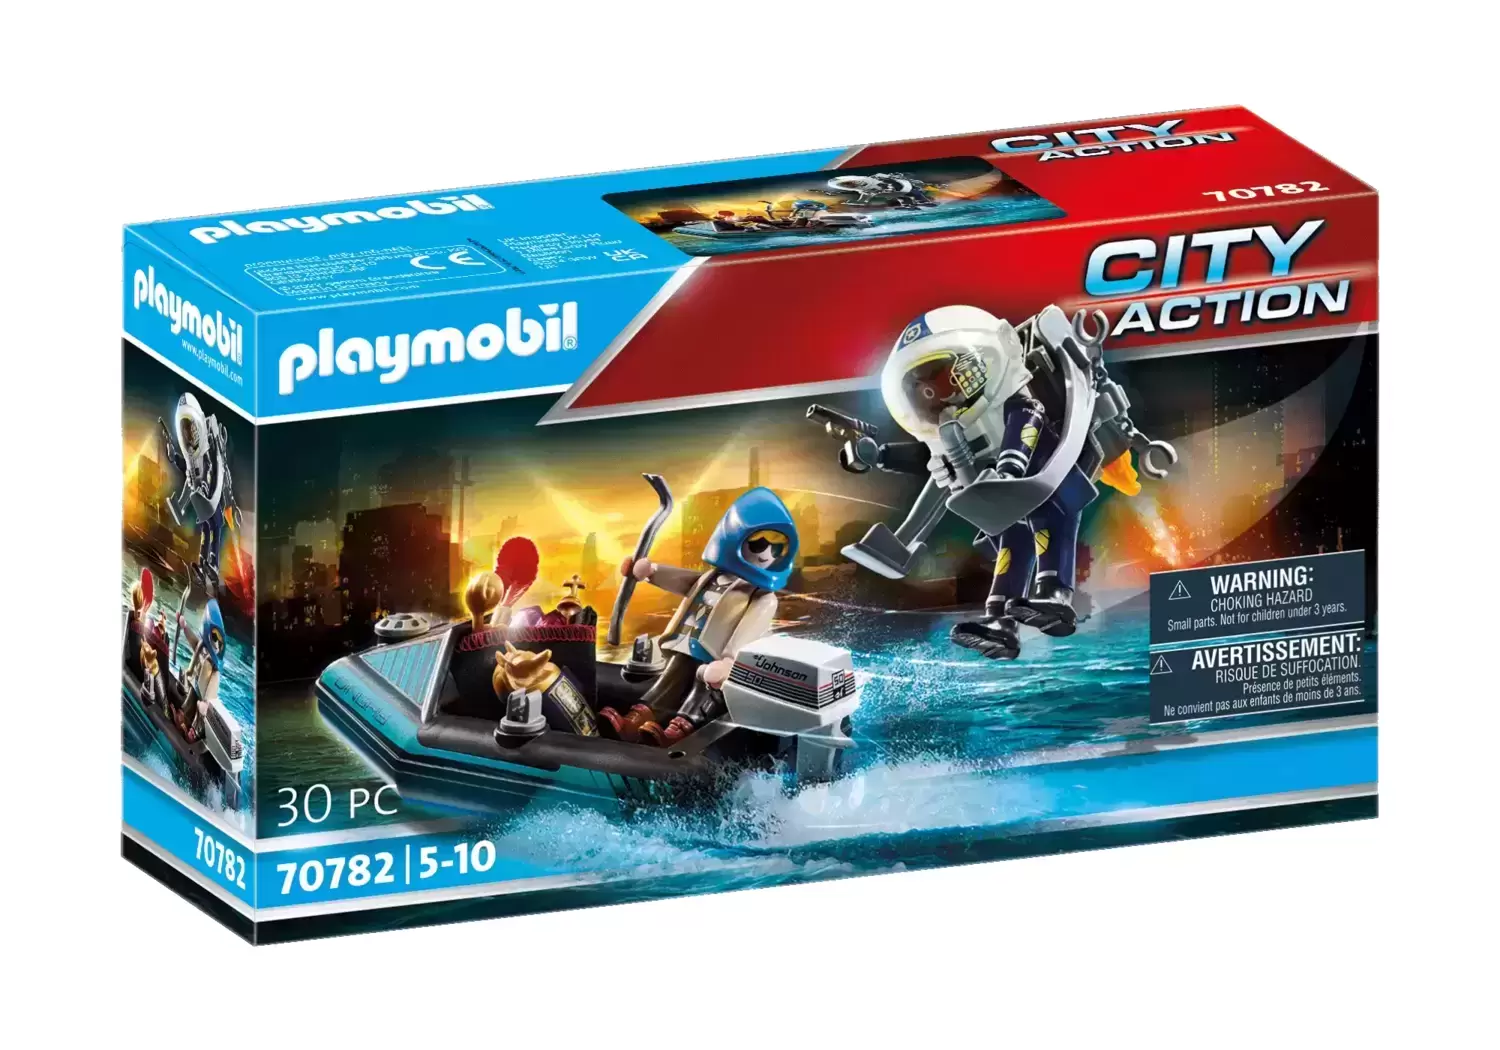 Police Playmobil - Police Jet Pack with Boat